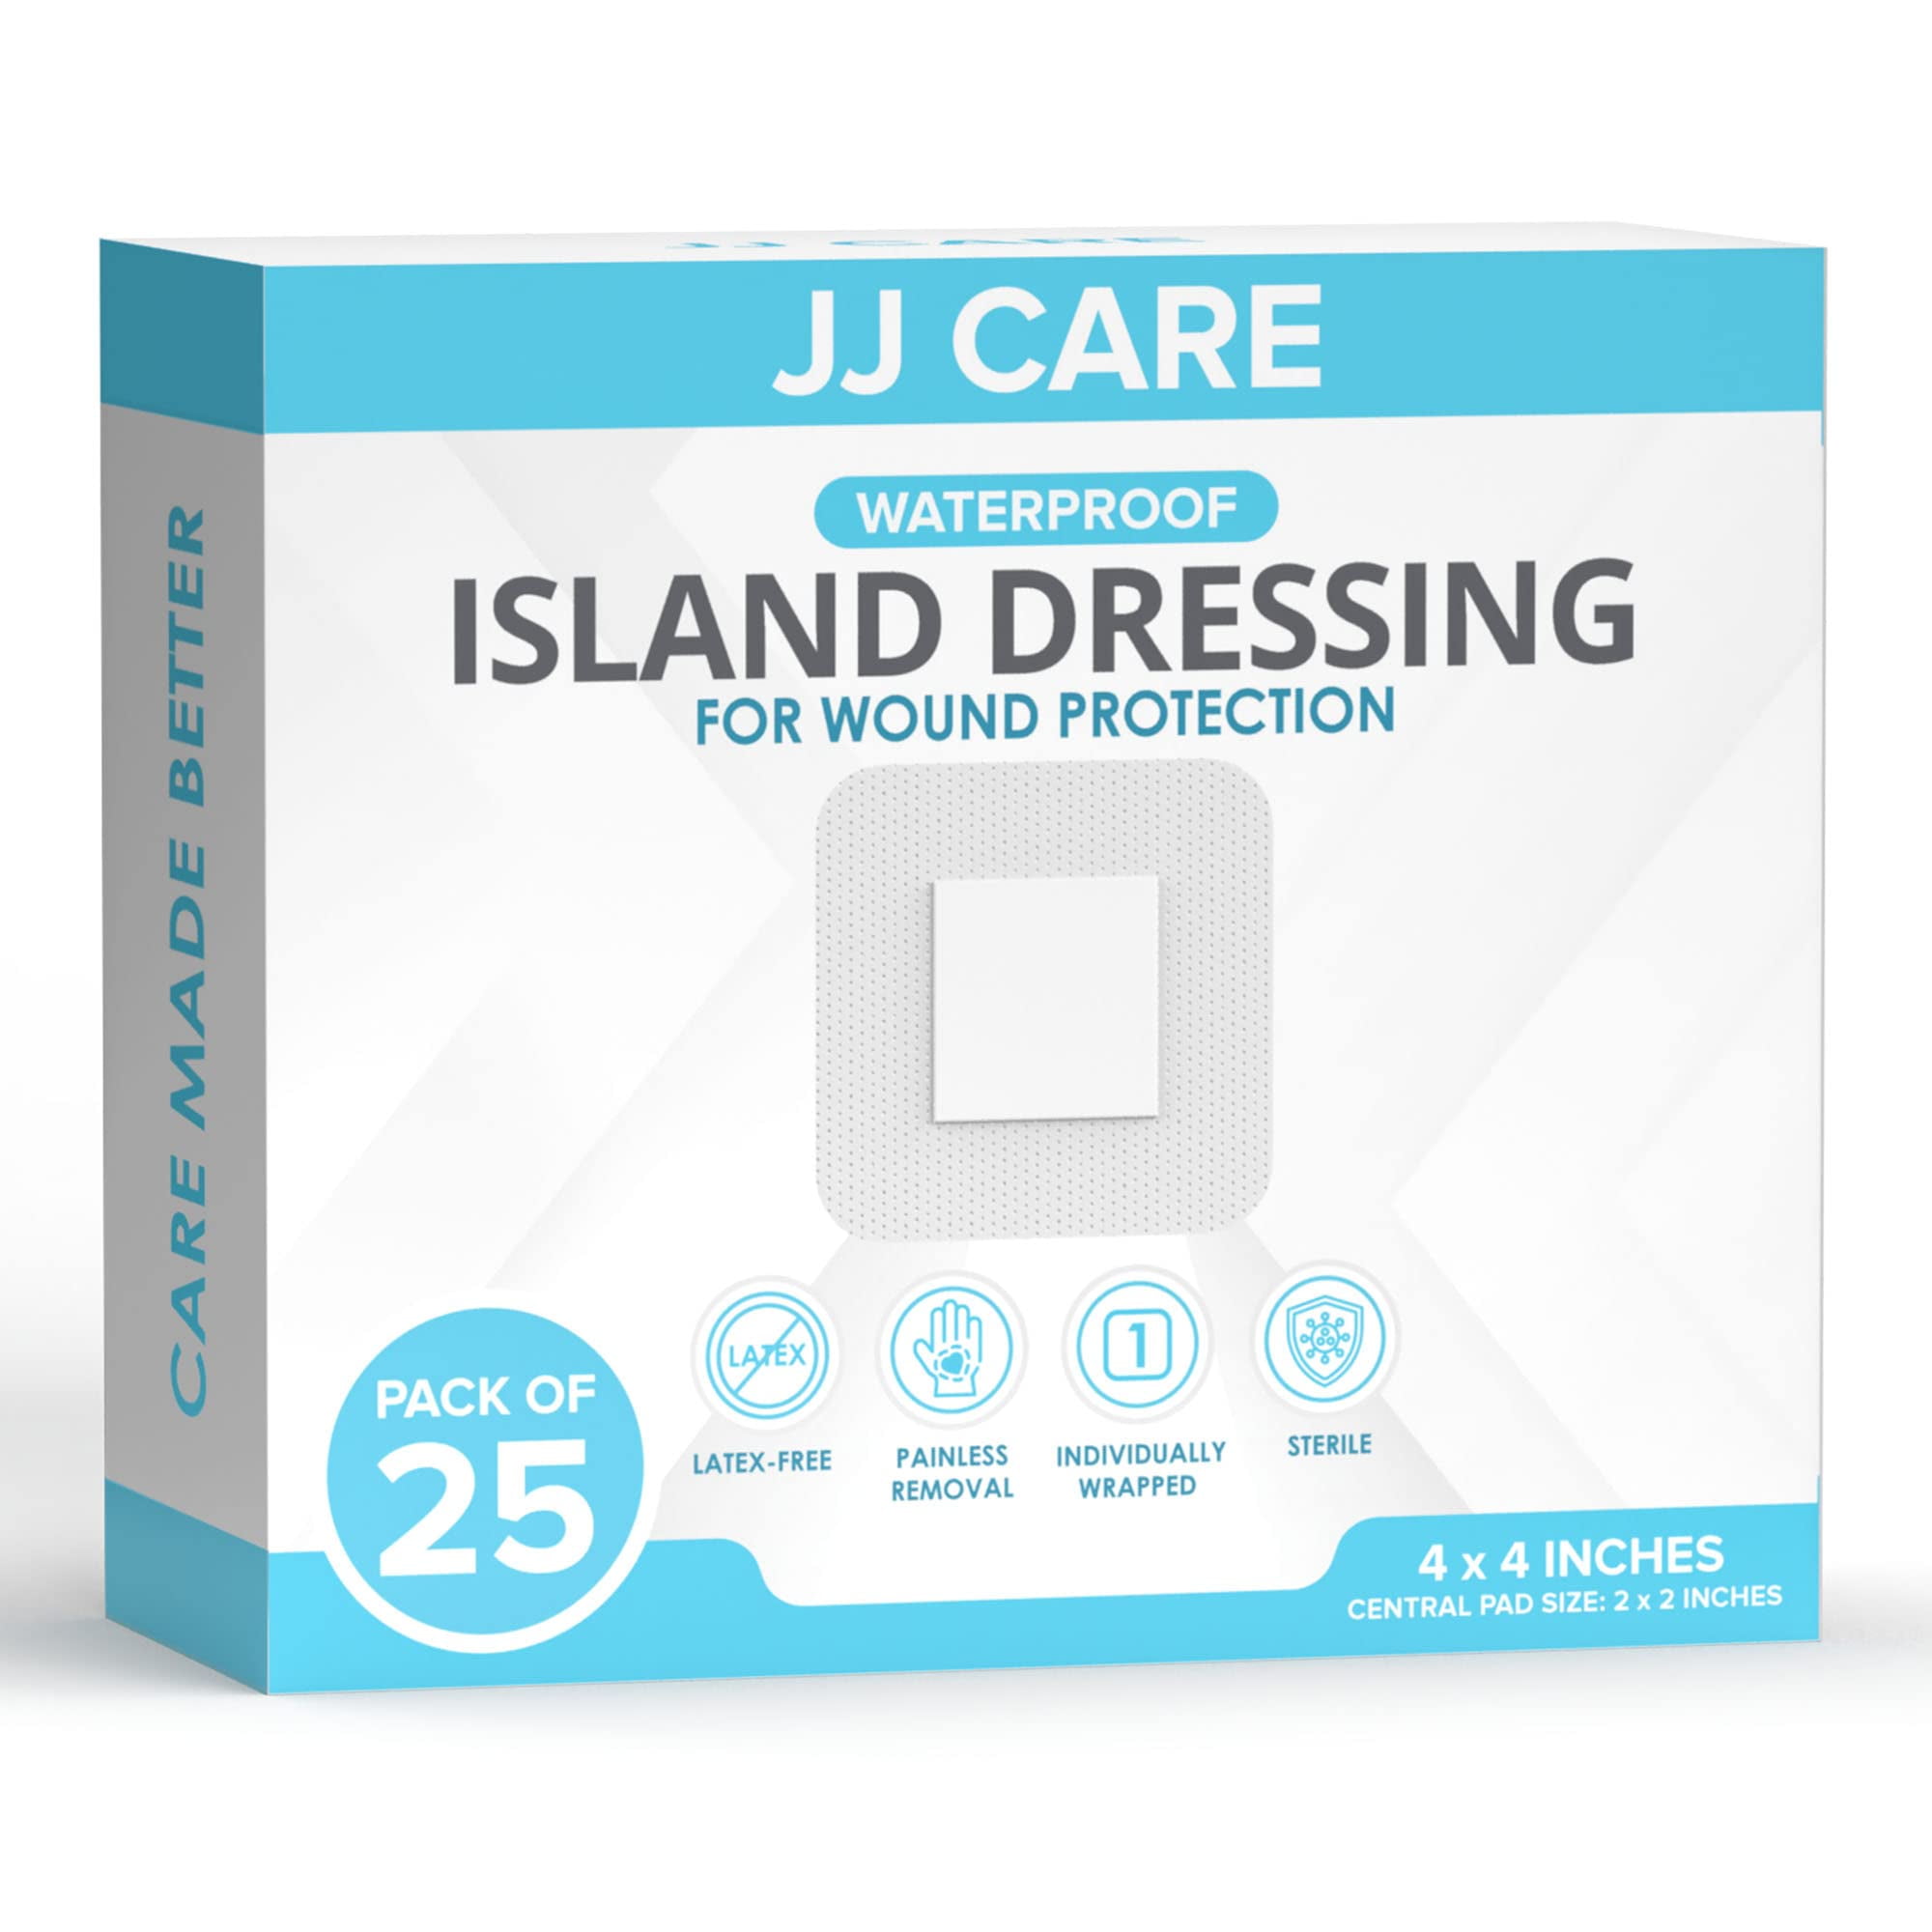 JJ CARE Waterproof Adhesive Island Dressing [Pack of 25], 4 x 4 Sterile  Island Wound Dressing, Breathable Bordered Gauze Dressing, Individually  Wrapped Latex Free Bandages with Non-Stick Central Pad 